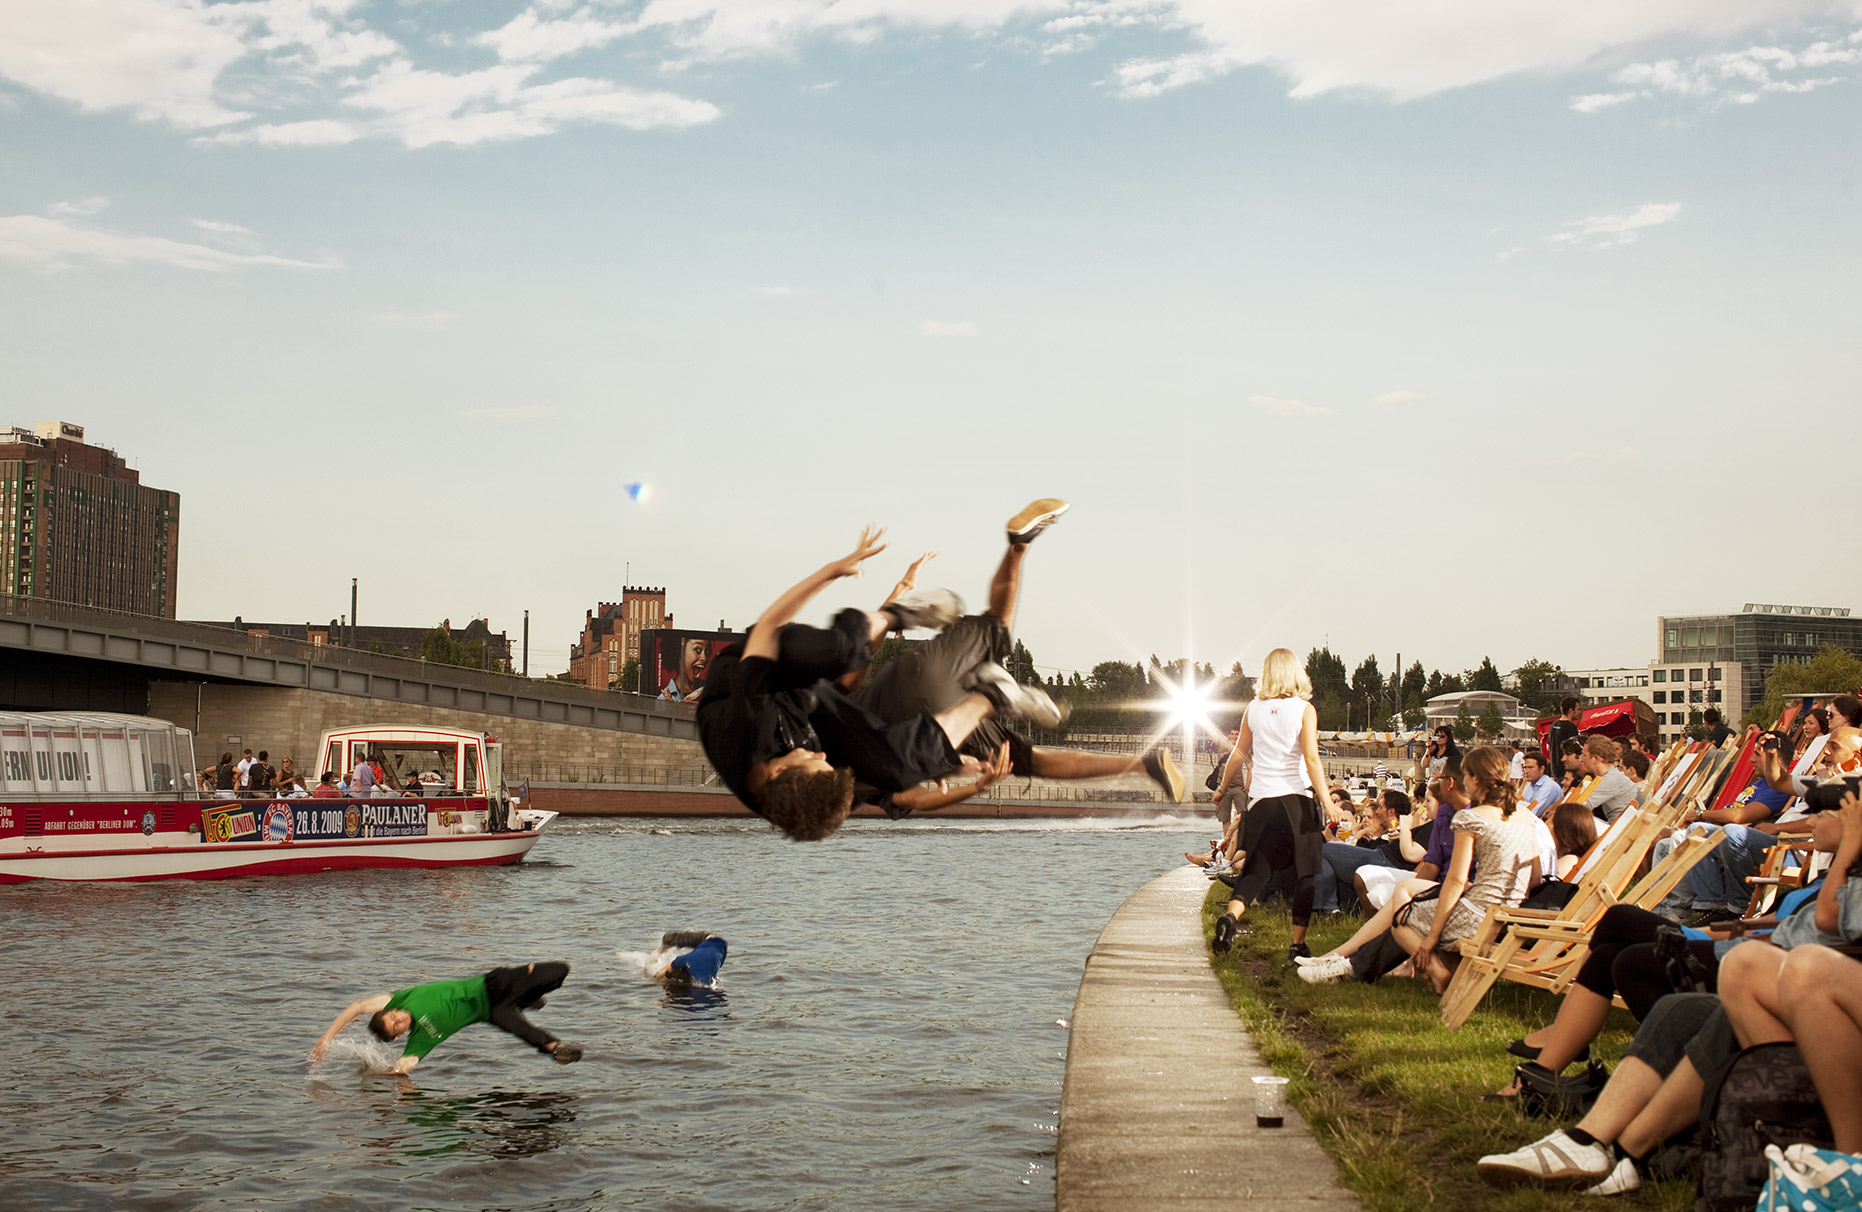 © Dirk Mathesius, test of courage, free work for Rausch Magazin, jump into river Spree, Berlin